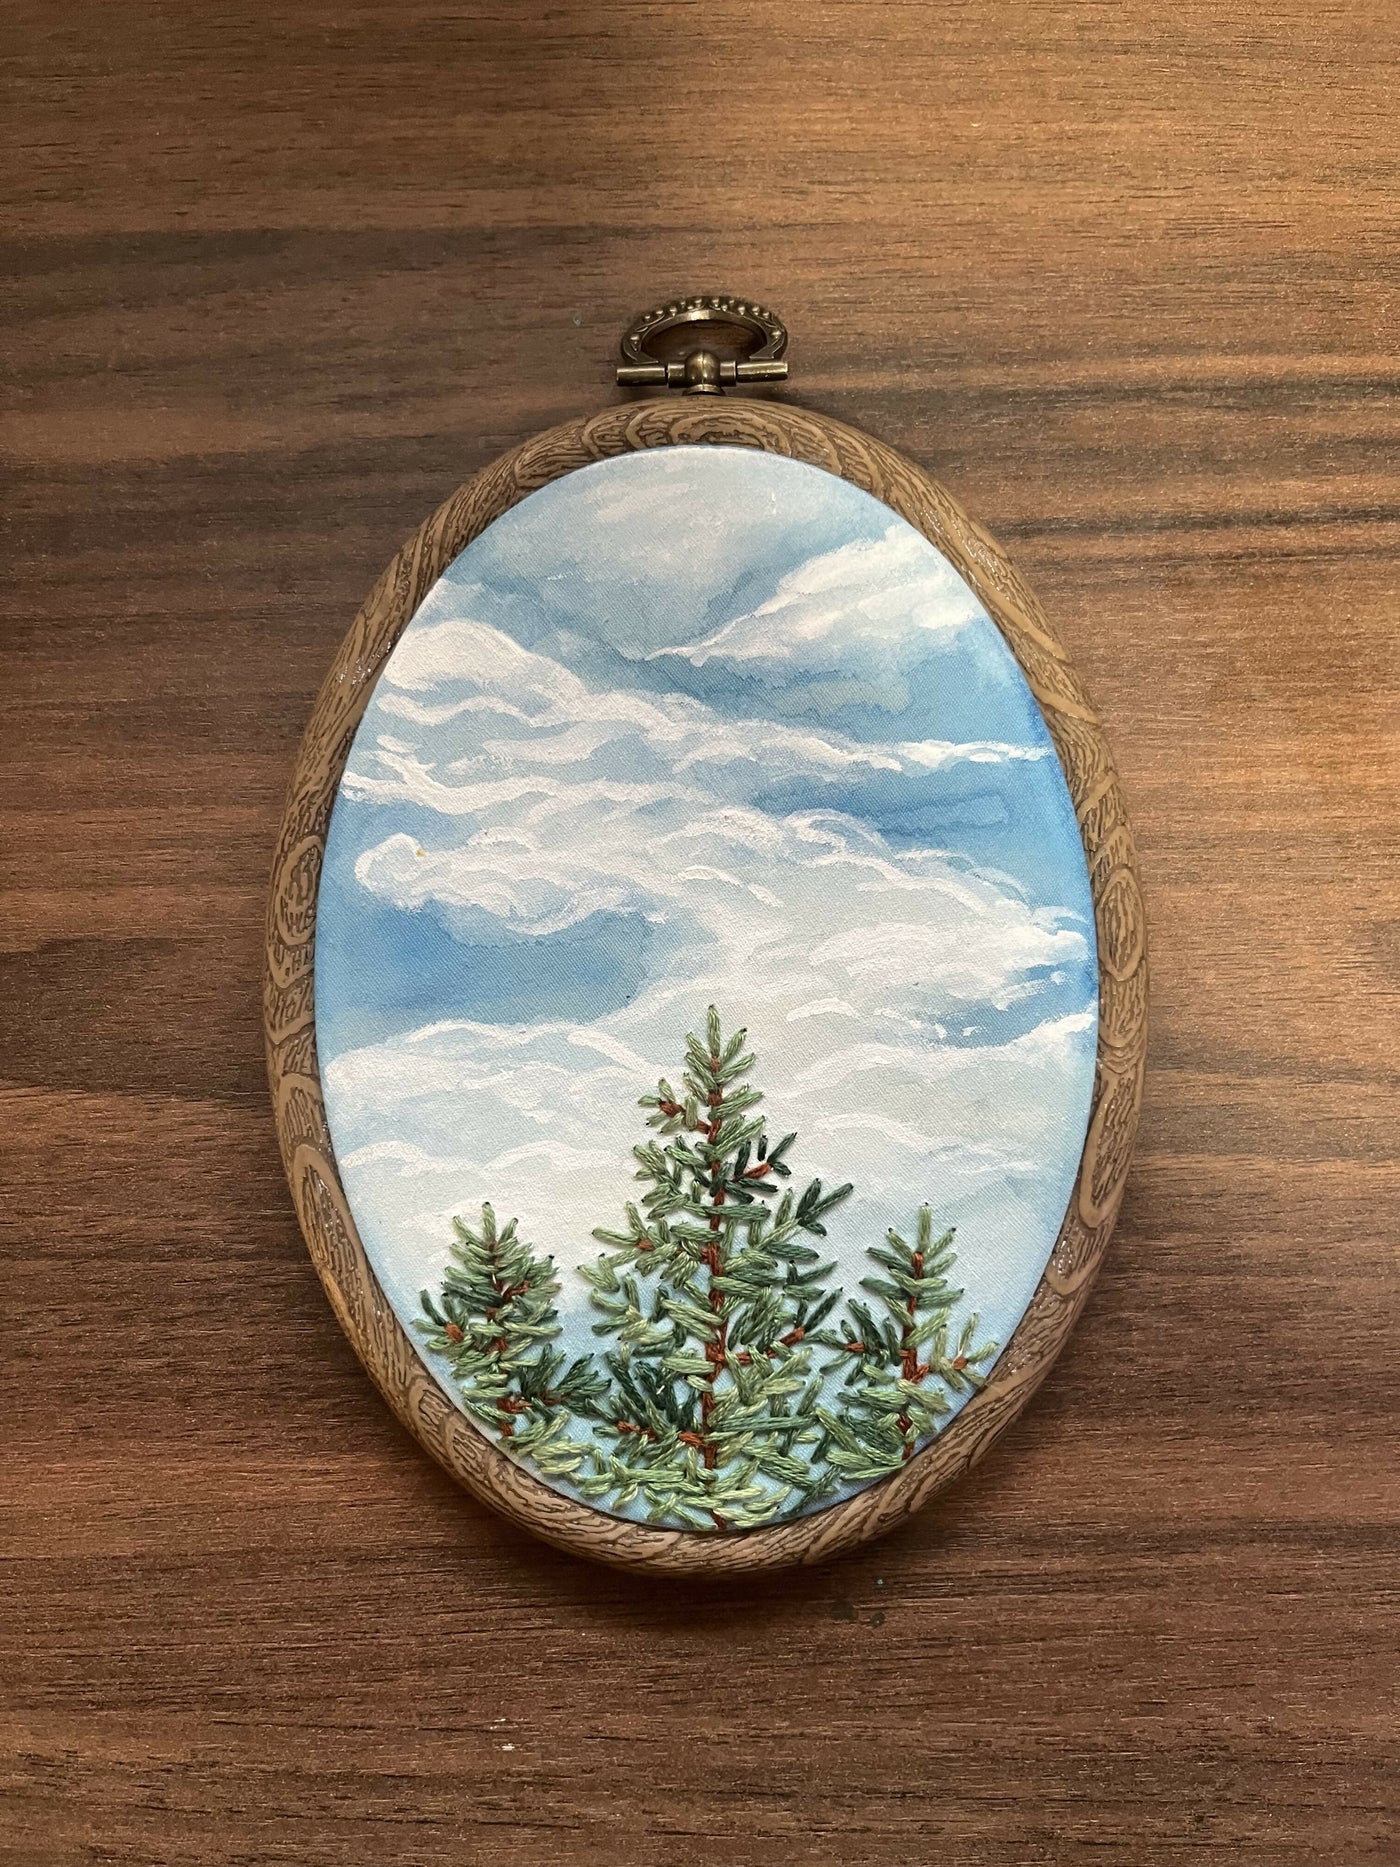 Embroidered tree tops